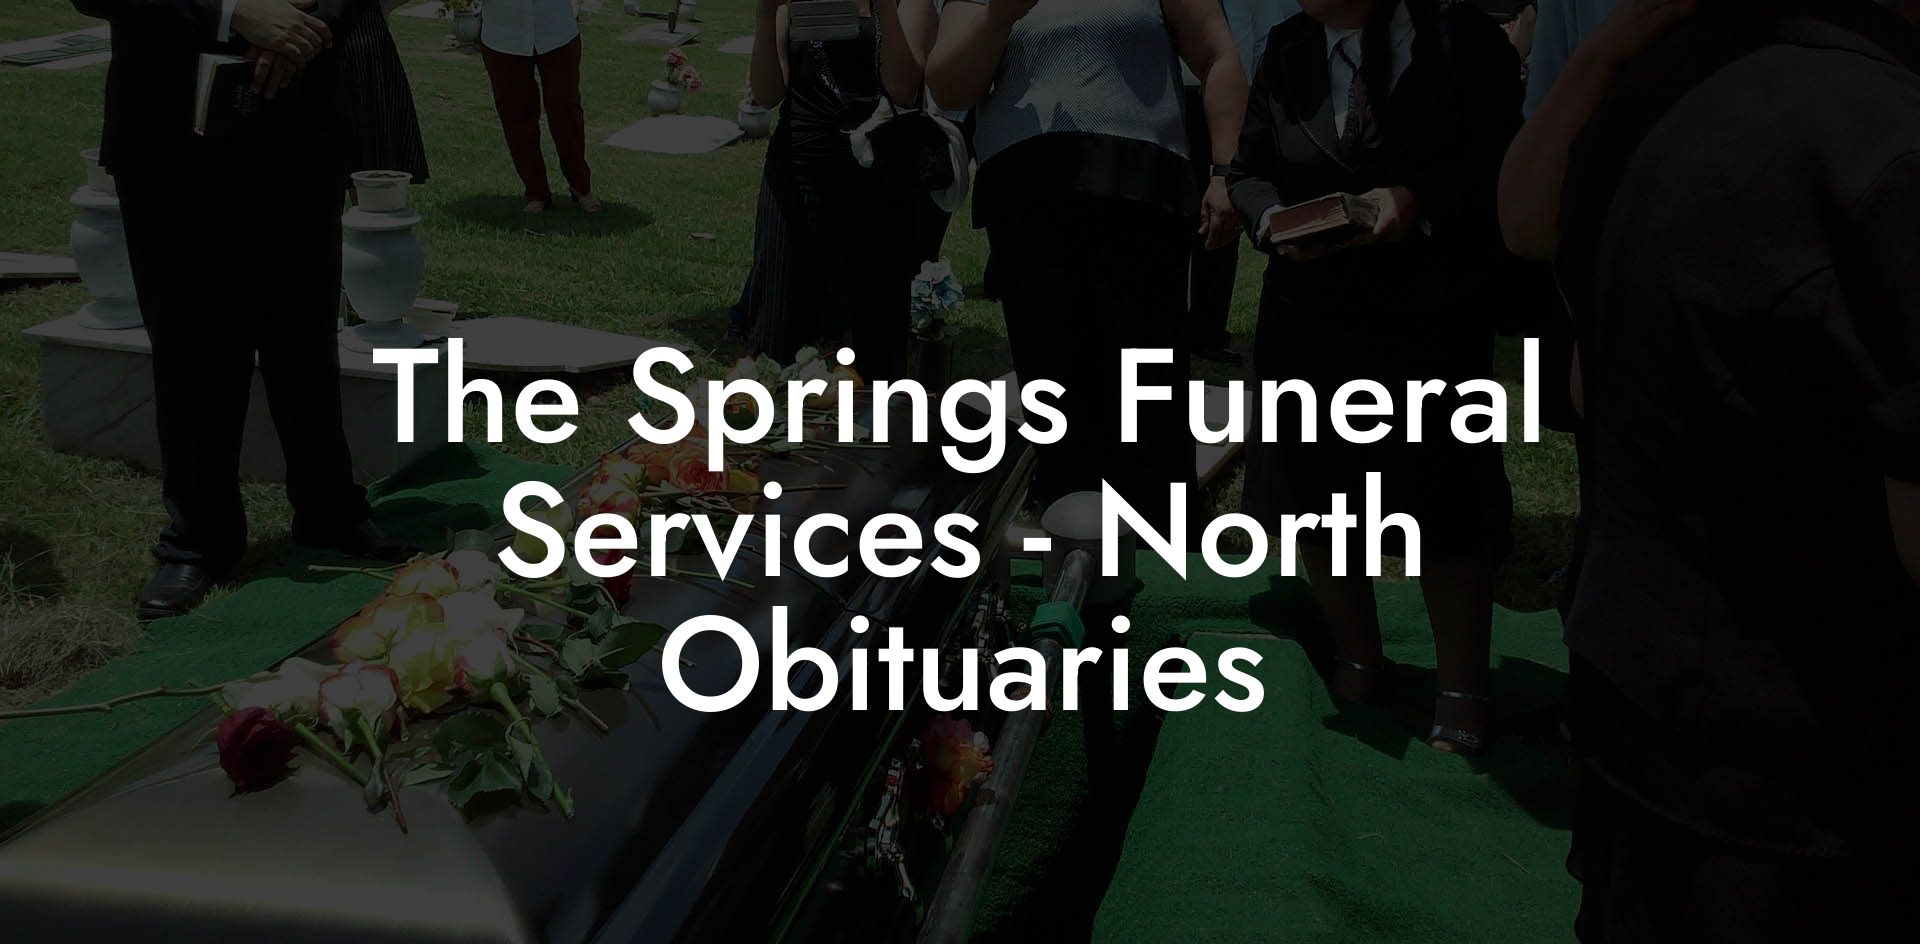 The Springs Funeral Services - North Obituaries